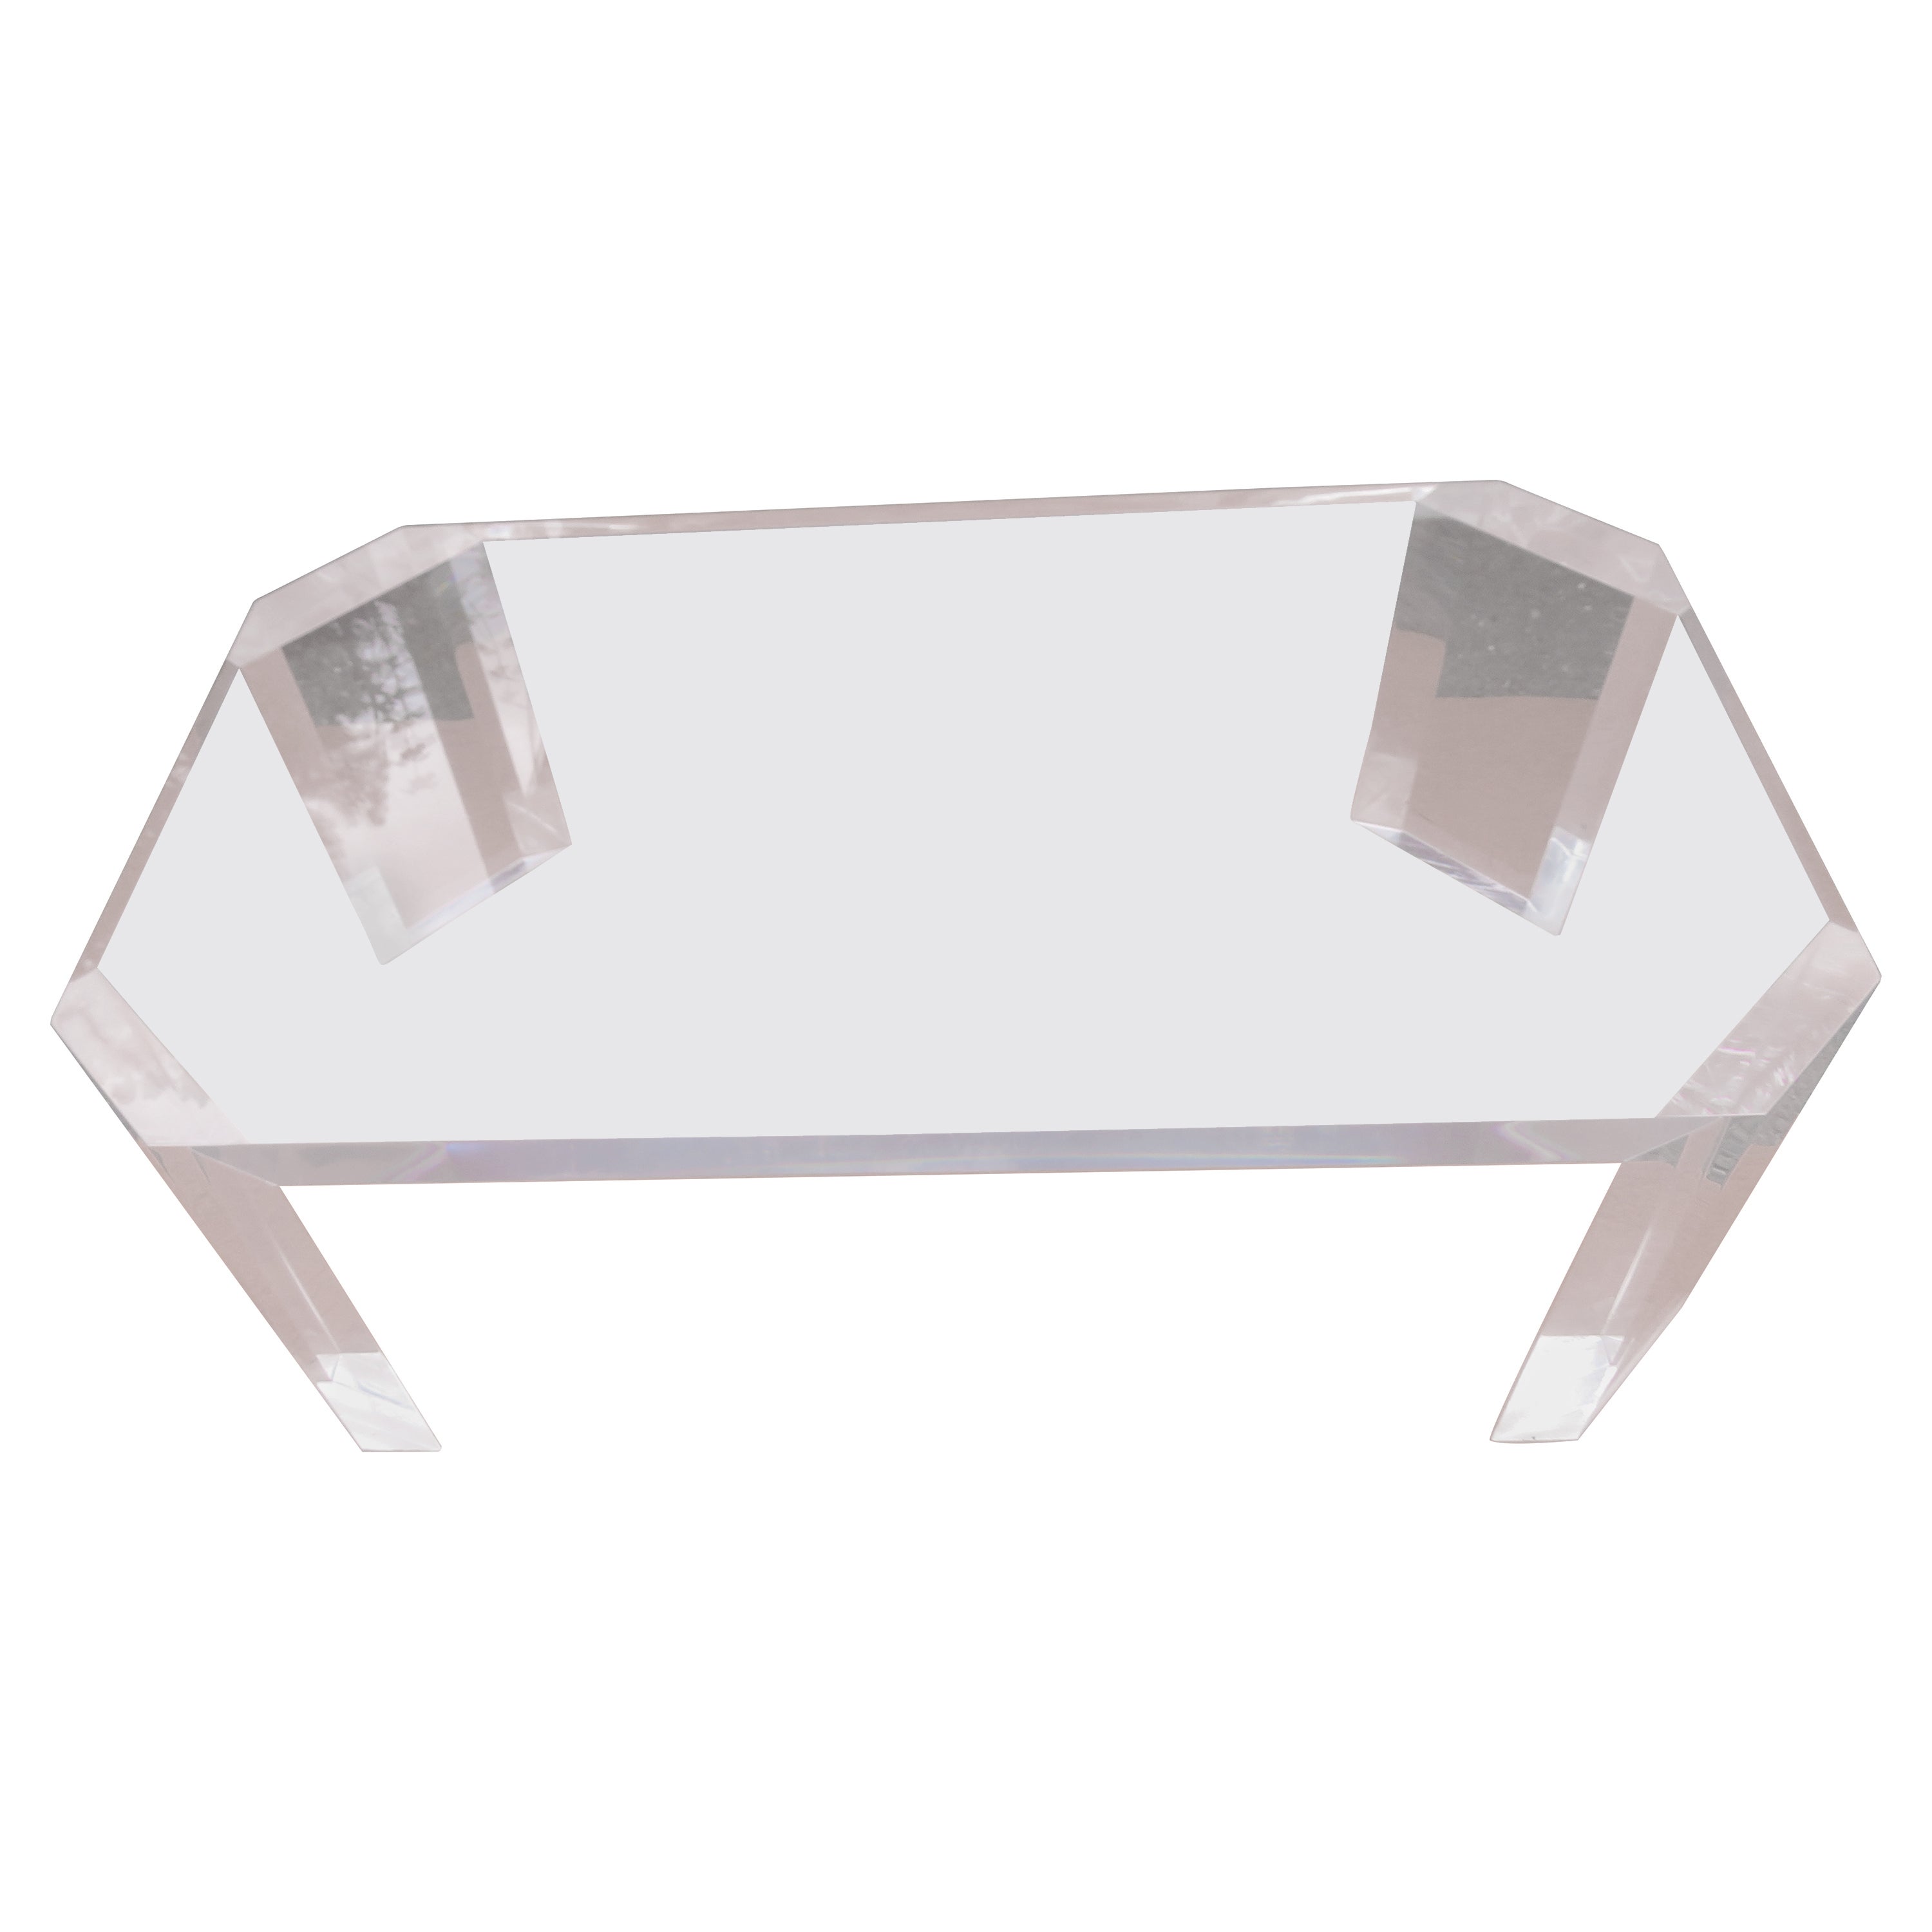 Sparkling Lucite Coffee Table by Charles Hollis Jones "L'AMI" For Sale